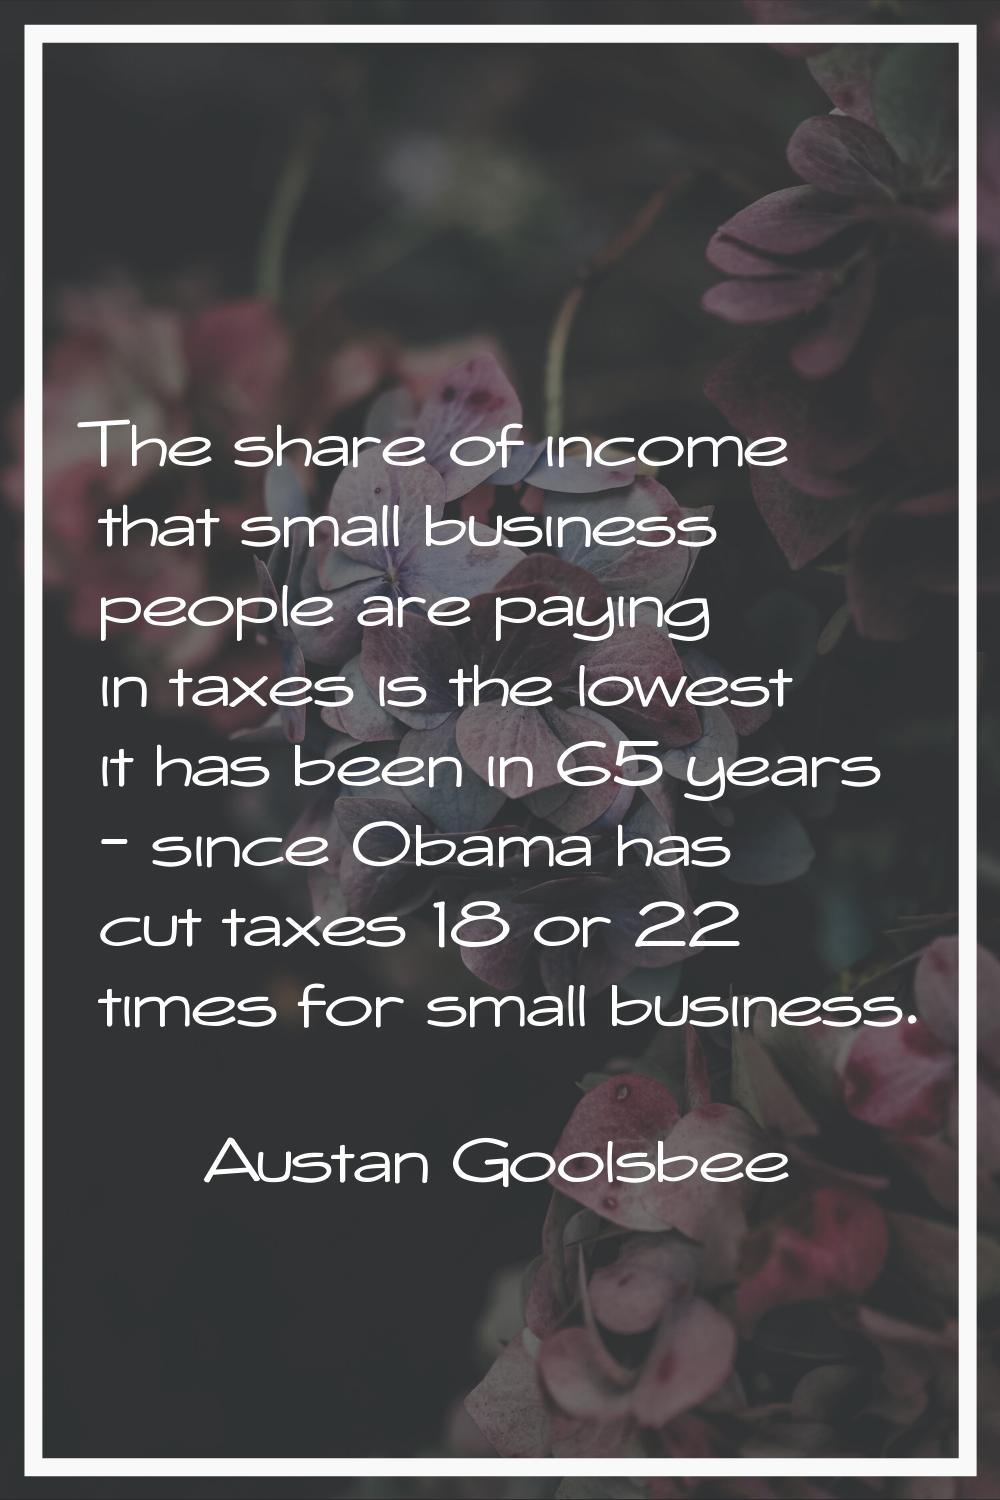 The share of income that small business people are paying in taxes is the lowest it has been in 65 